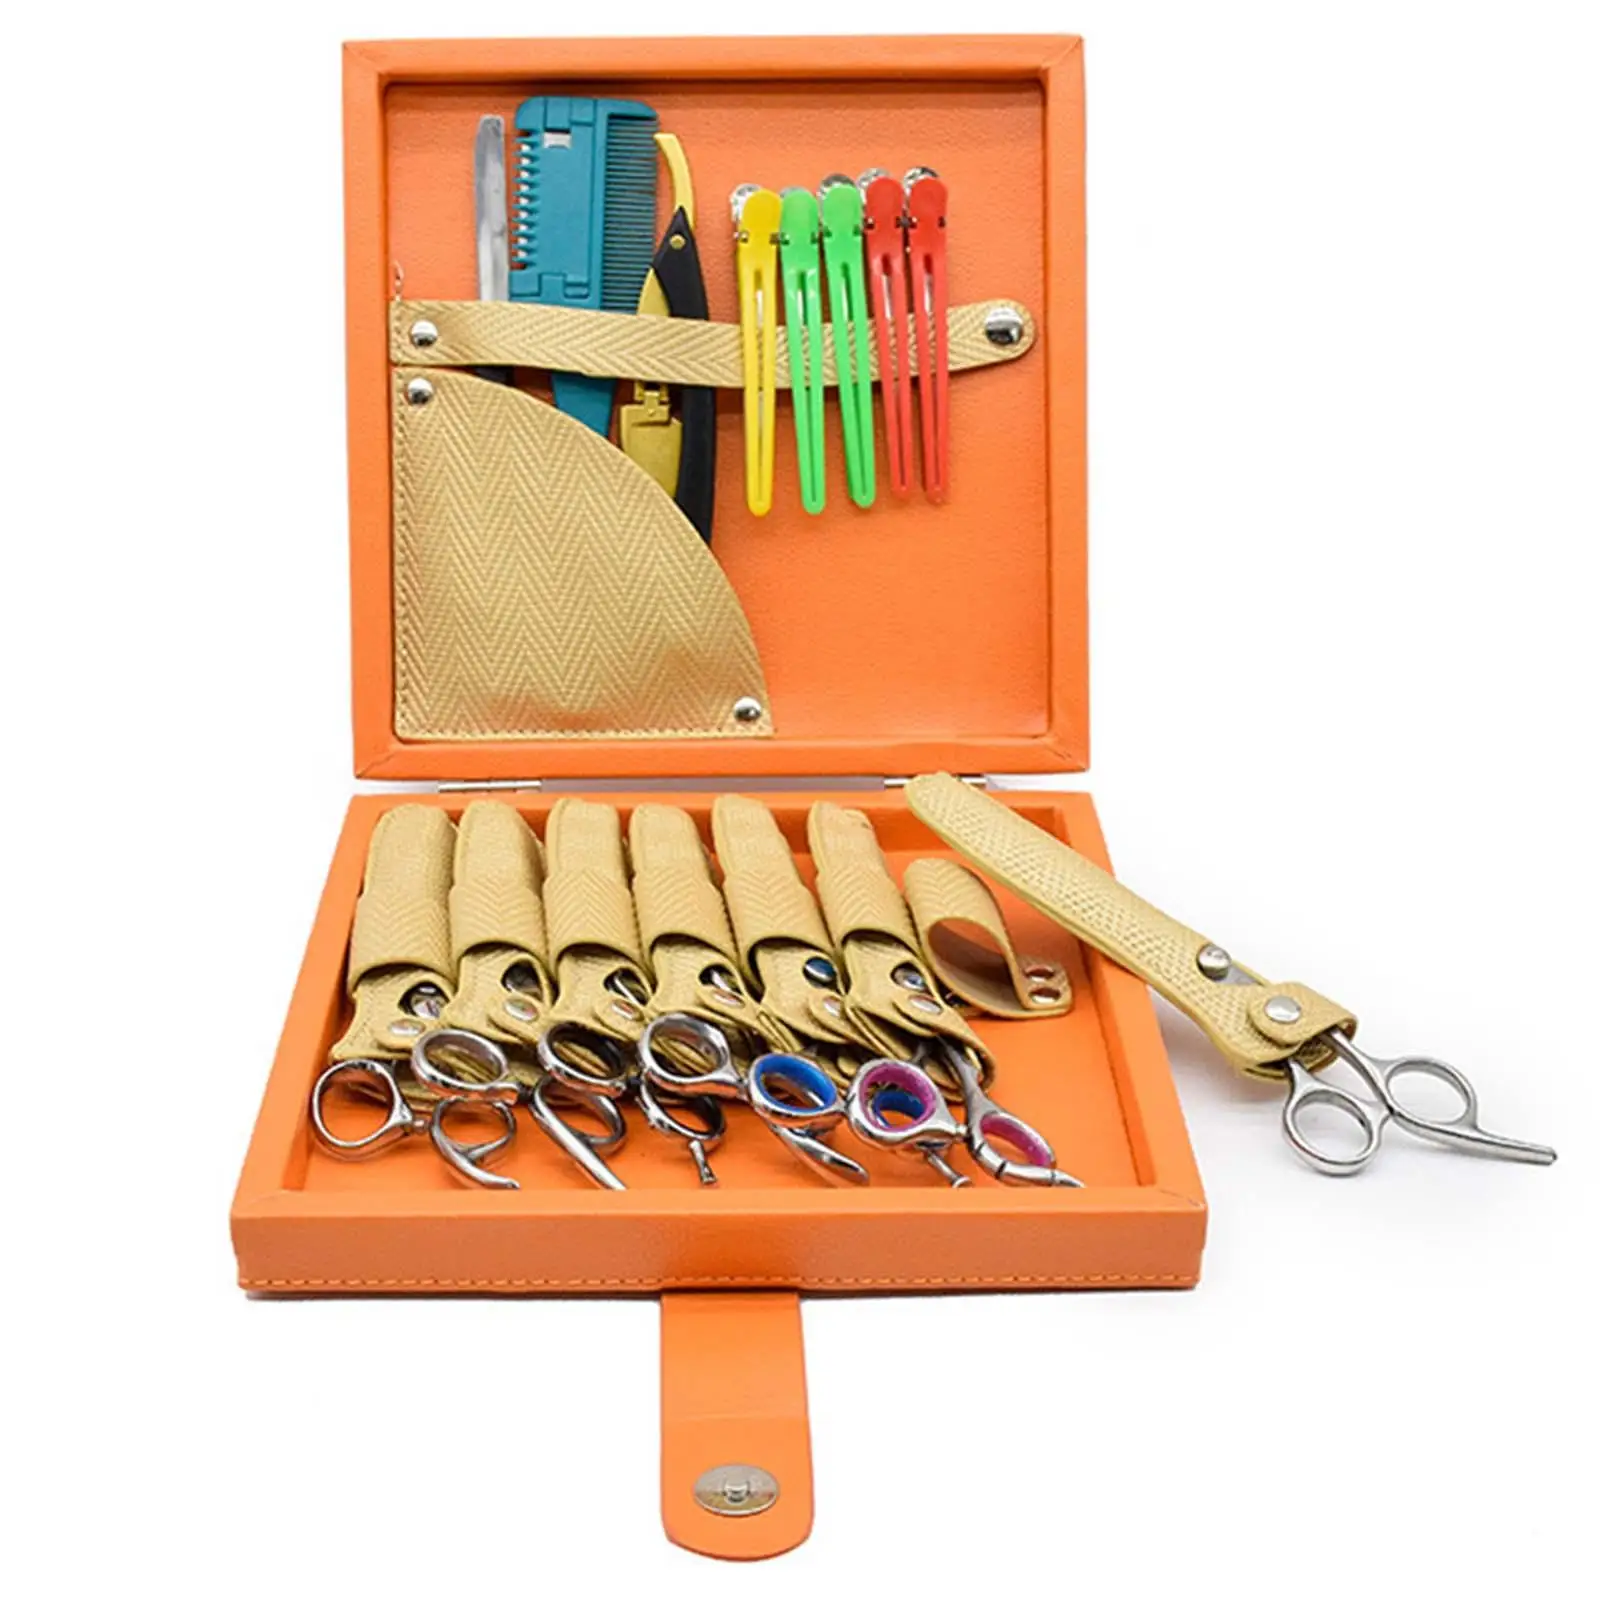 Barber Shears Storage Hair Scissors Box PU Leather Versatile Compact Size for Multiple Scissors, Combs, Hair Clips Sturdy Orange